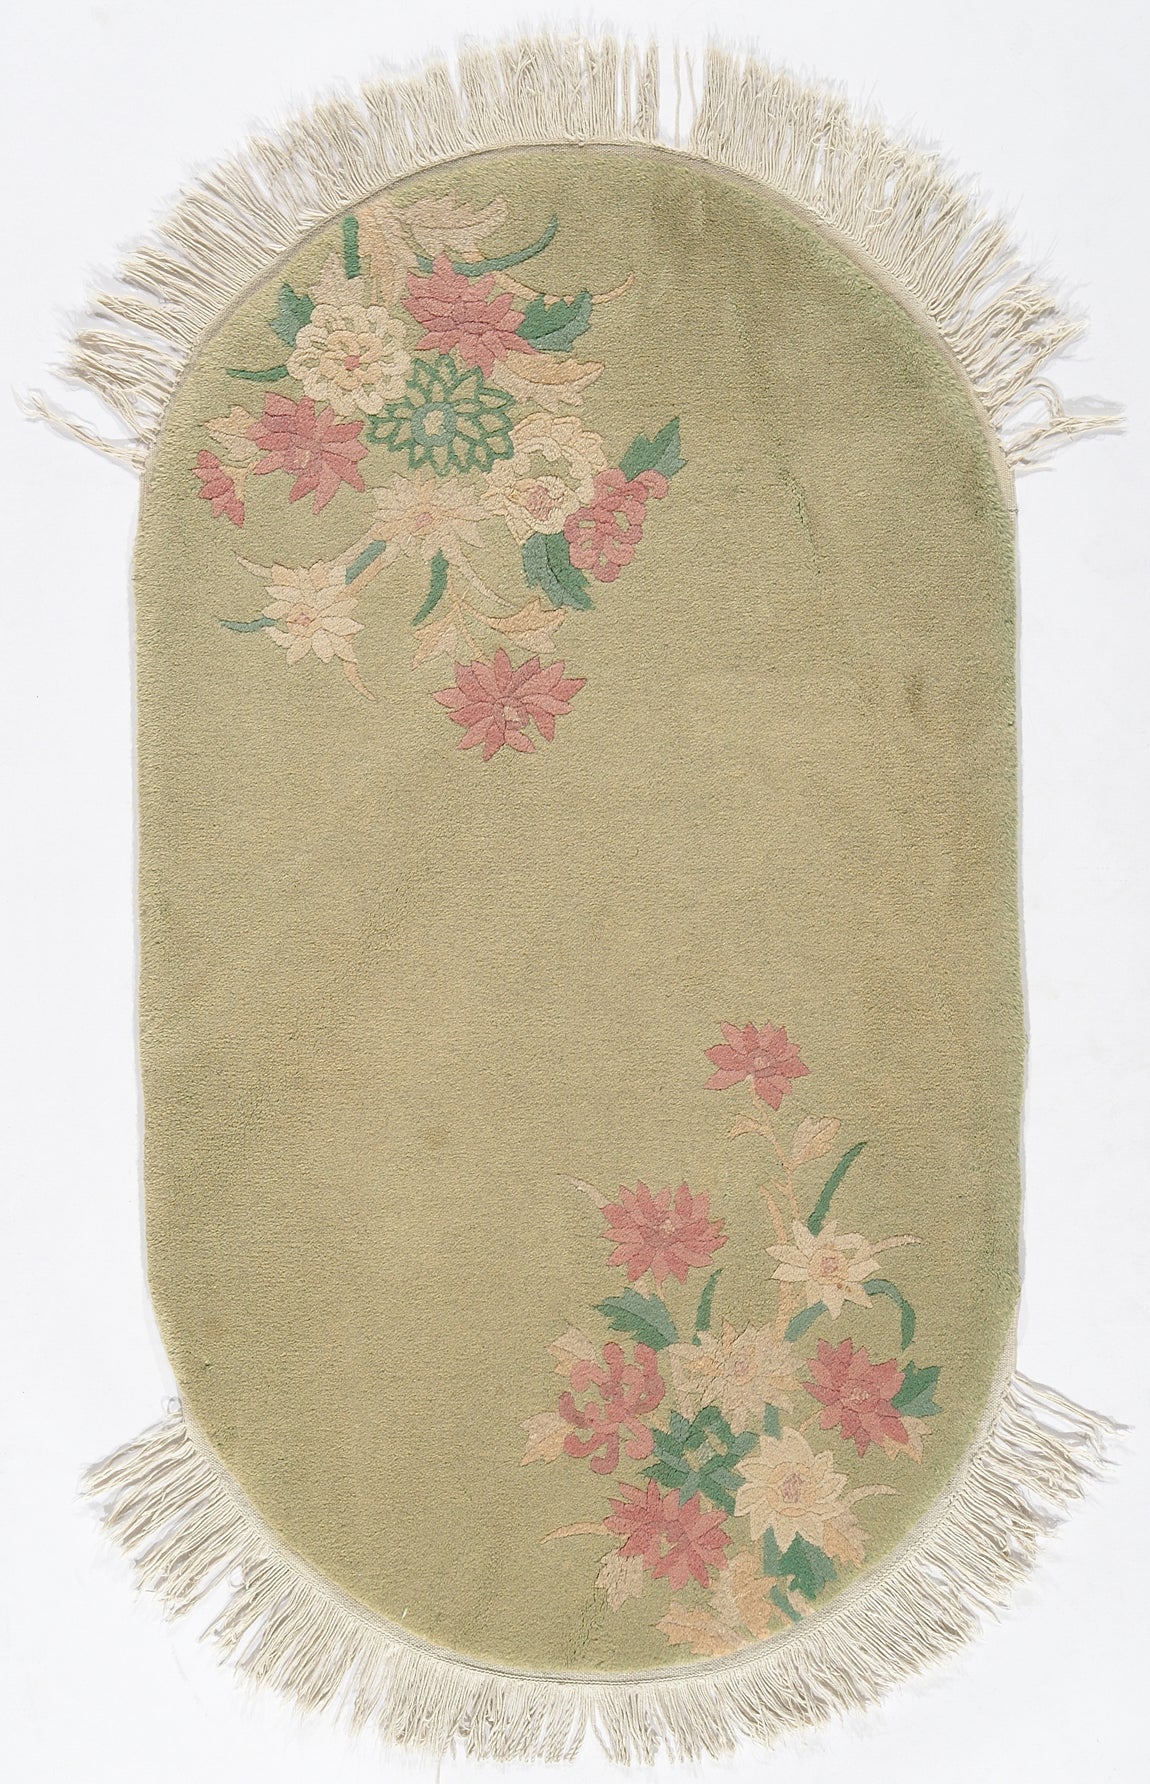 3'x5' Oval Light Green Floral Chinese Art Deco Rug